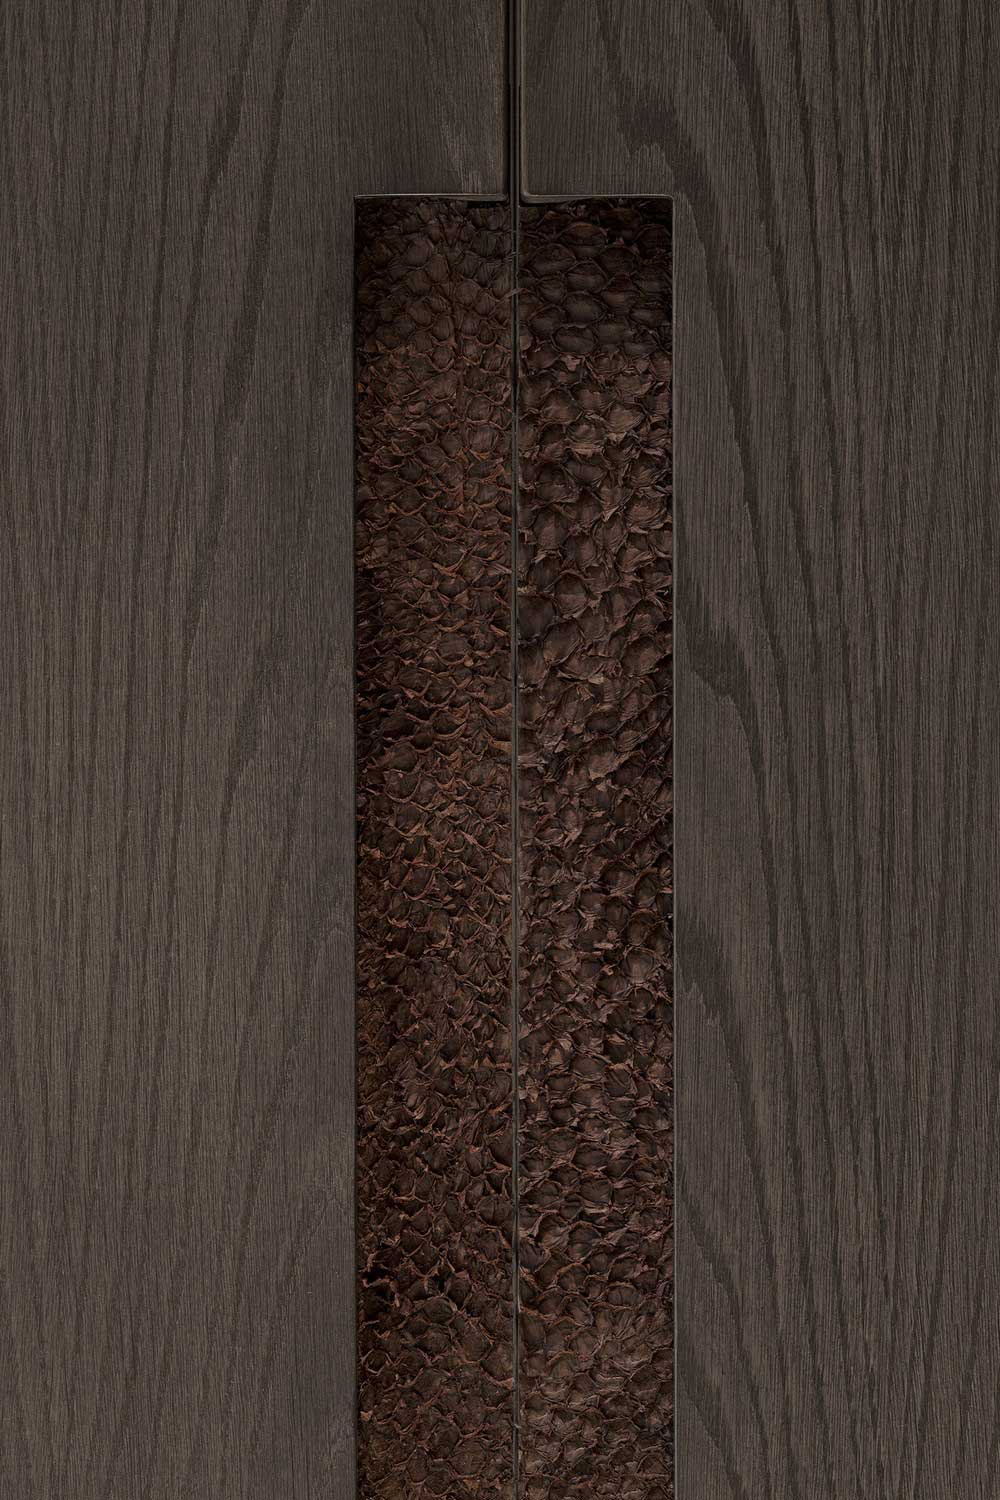 Wood Detail The Traditional Wood Detail Installed Over The Rotterdam Residence Indoor Sliding Door To Emphasize The Luxury Of The House House Designs  Contemporary Villa Interior With Sophisticated Chic Design 